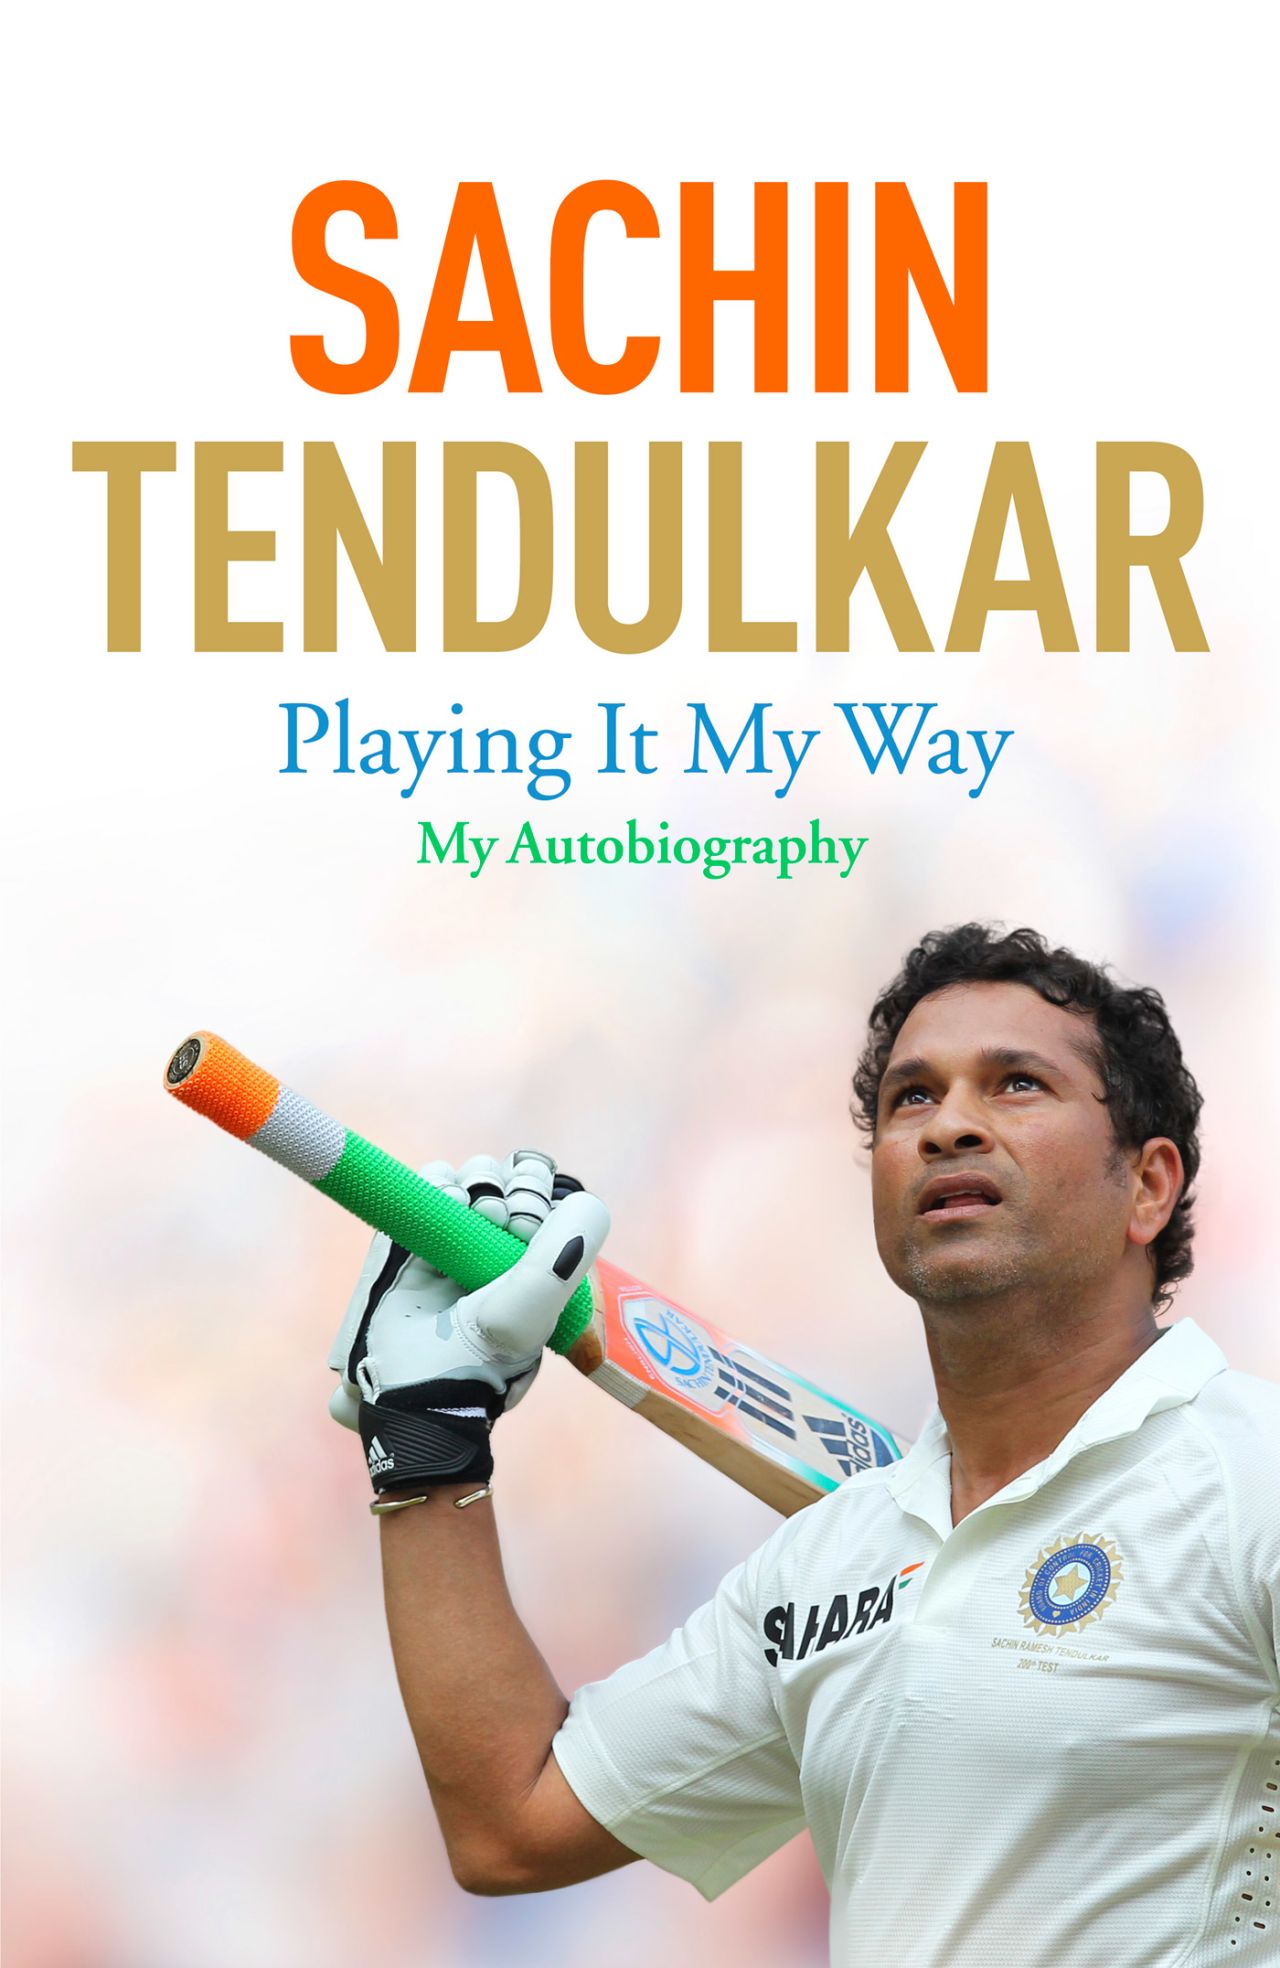 Cover image of <i>Playing it My Way: My Autobiography</i> by Sachin Tendulkar